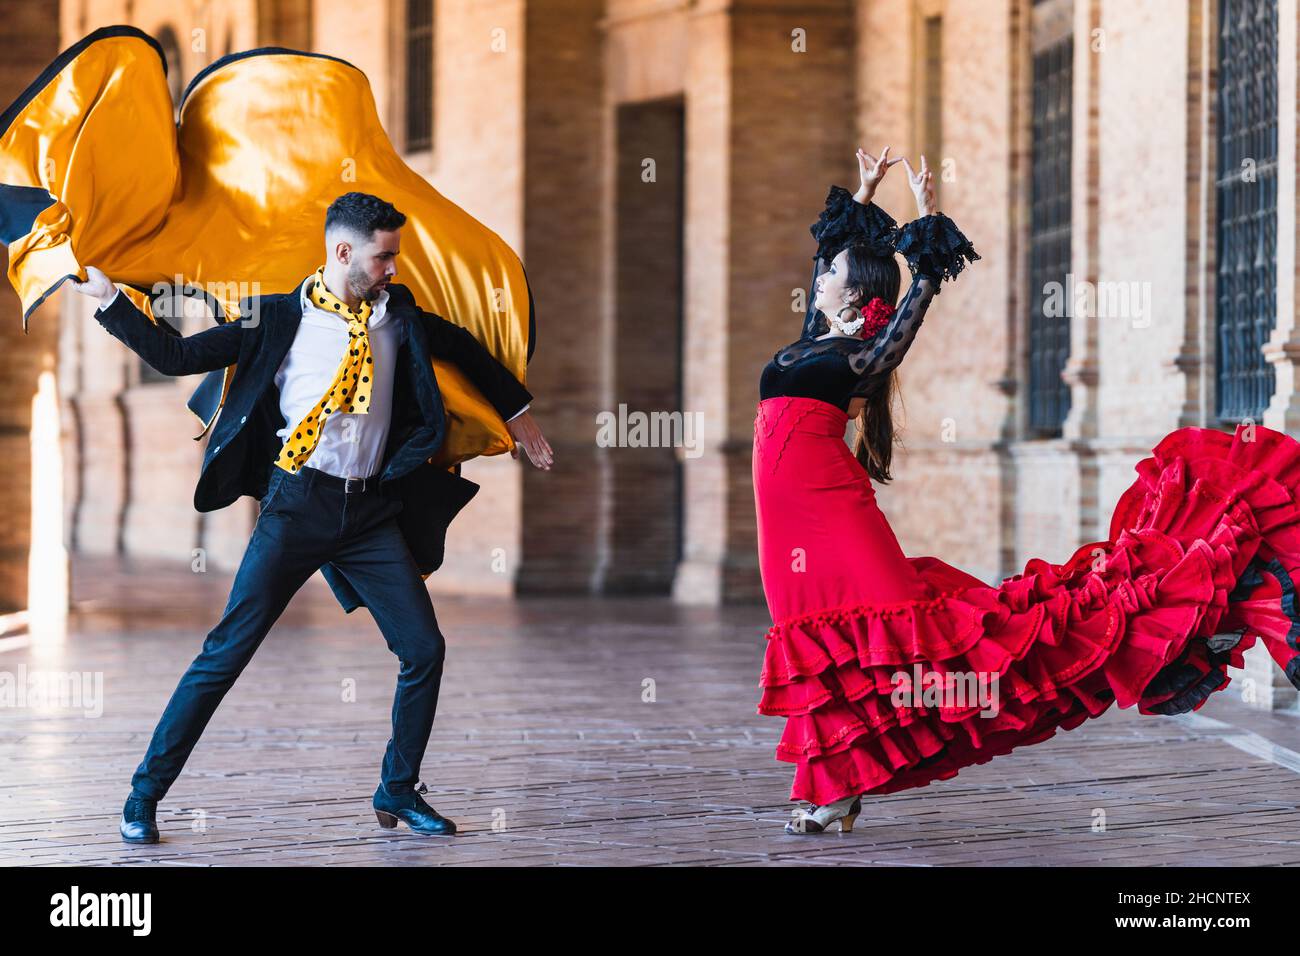 Man with a cloth dancing falmenco with a woman outdoors Stock Photo